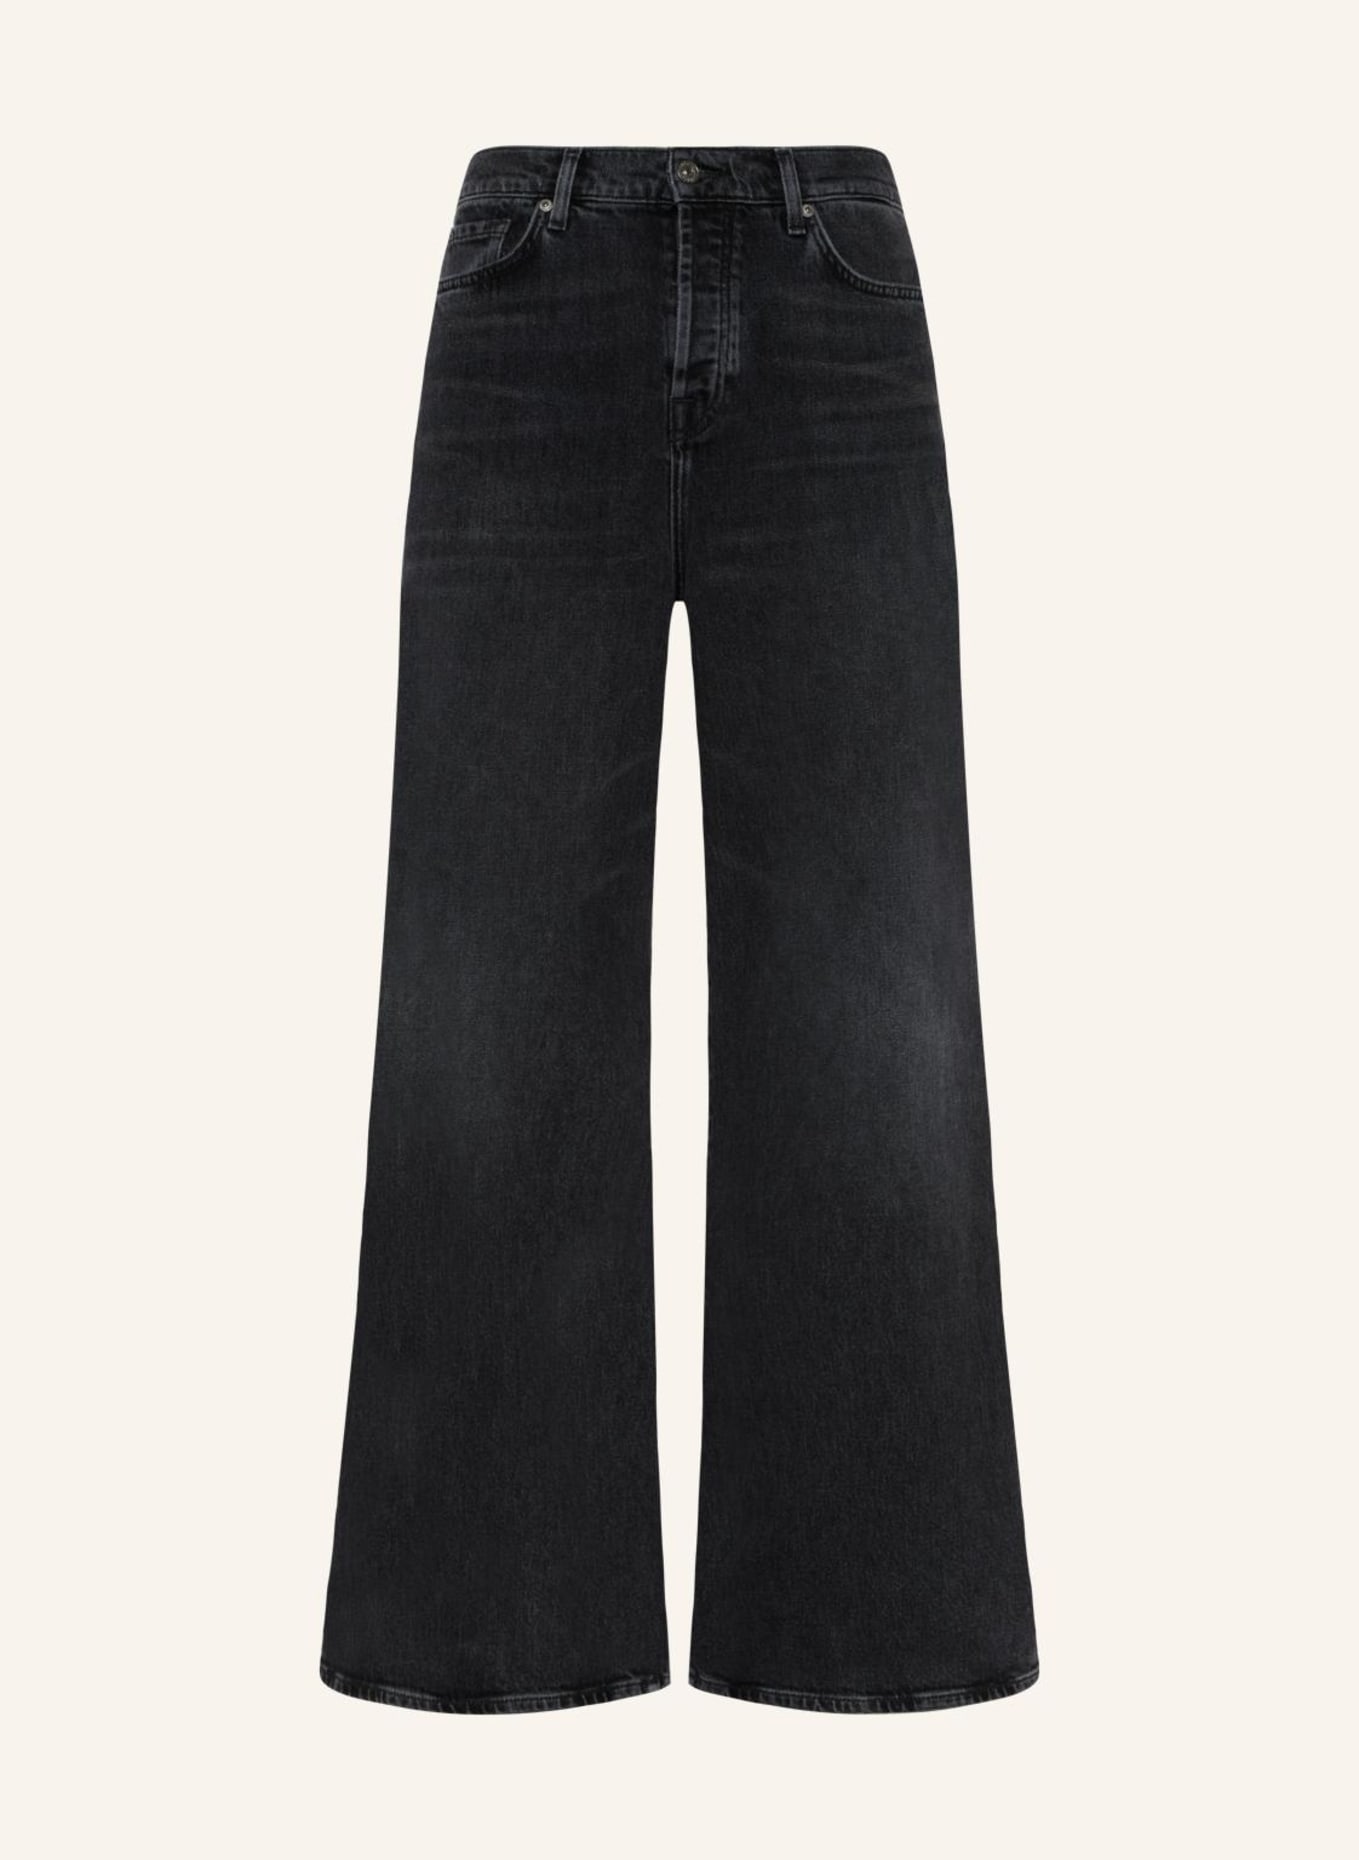 7 for all mankind Jeans ZOEY Flare Fit, Farbe: SCHWARZ (Bild 1)